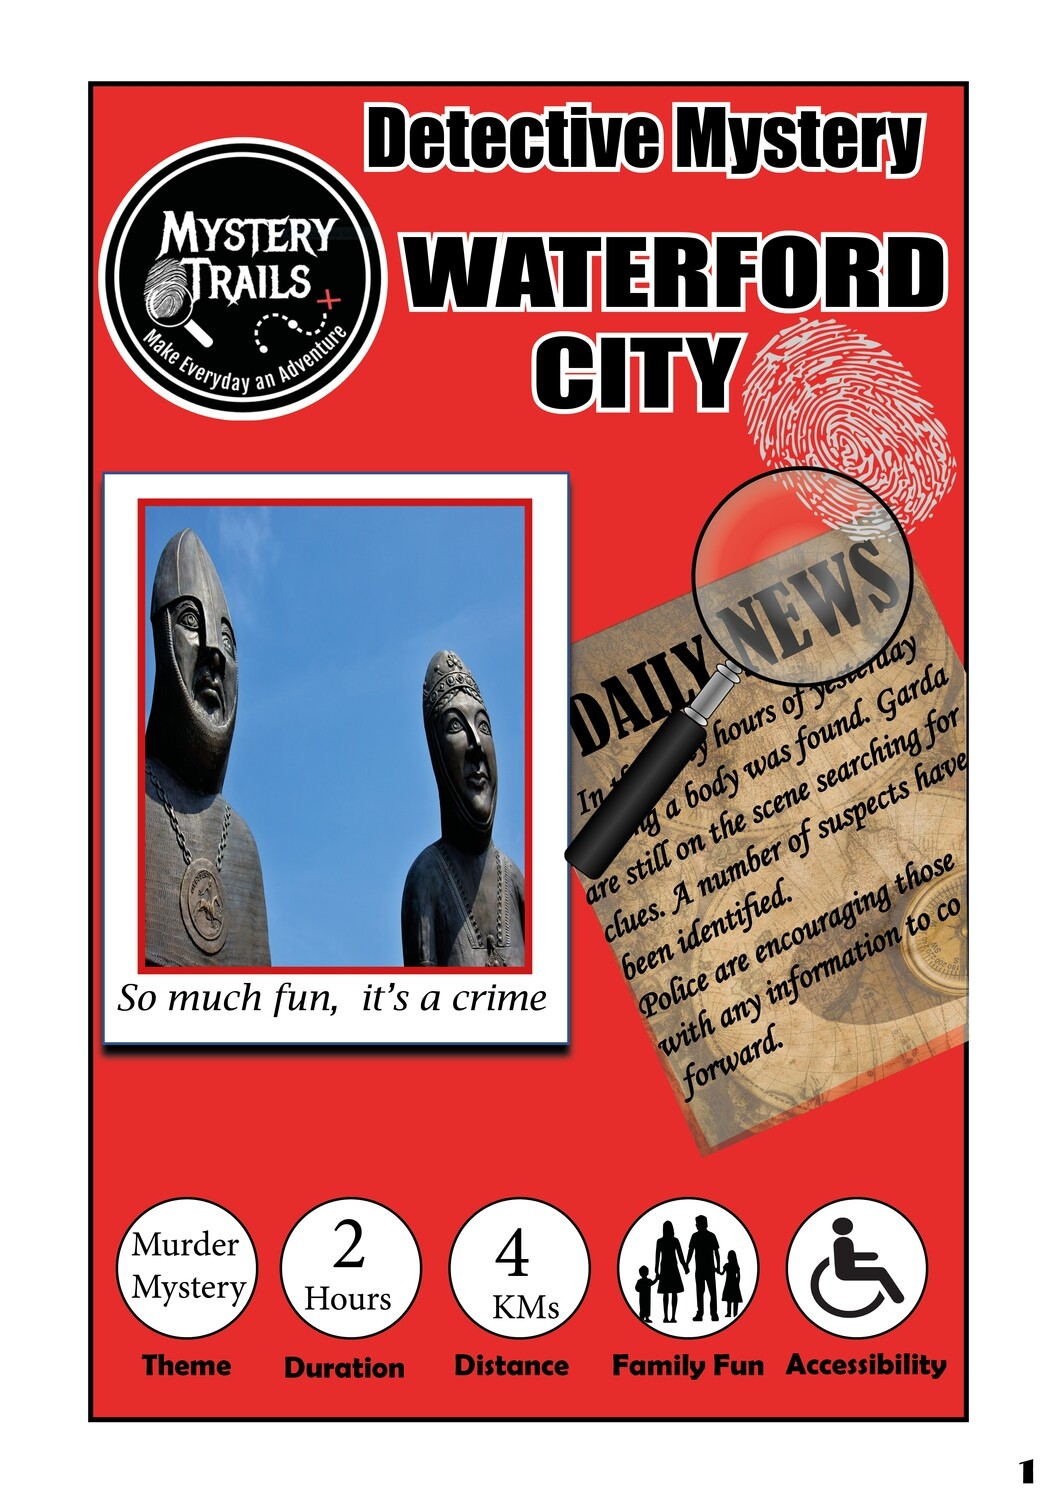 Waterford City- Detective Mystery